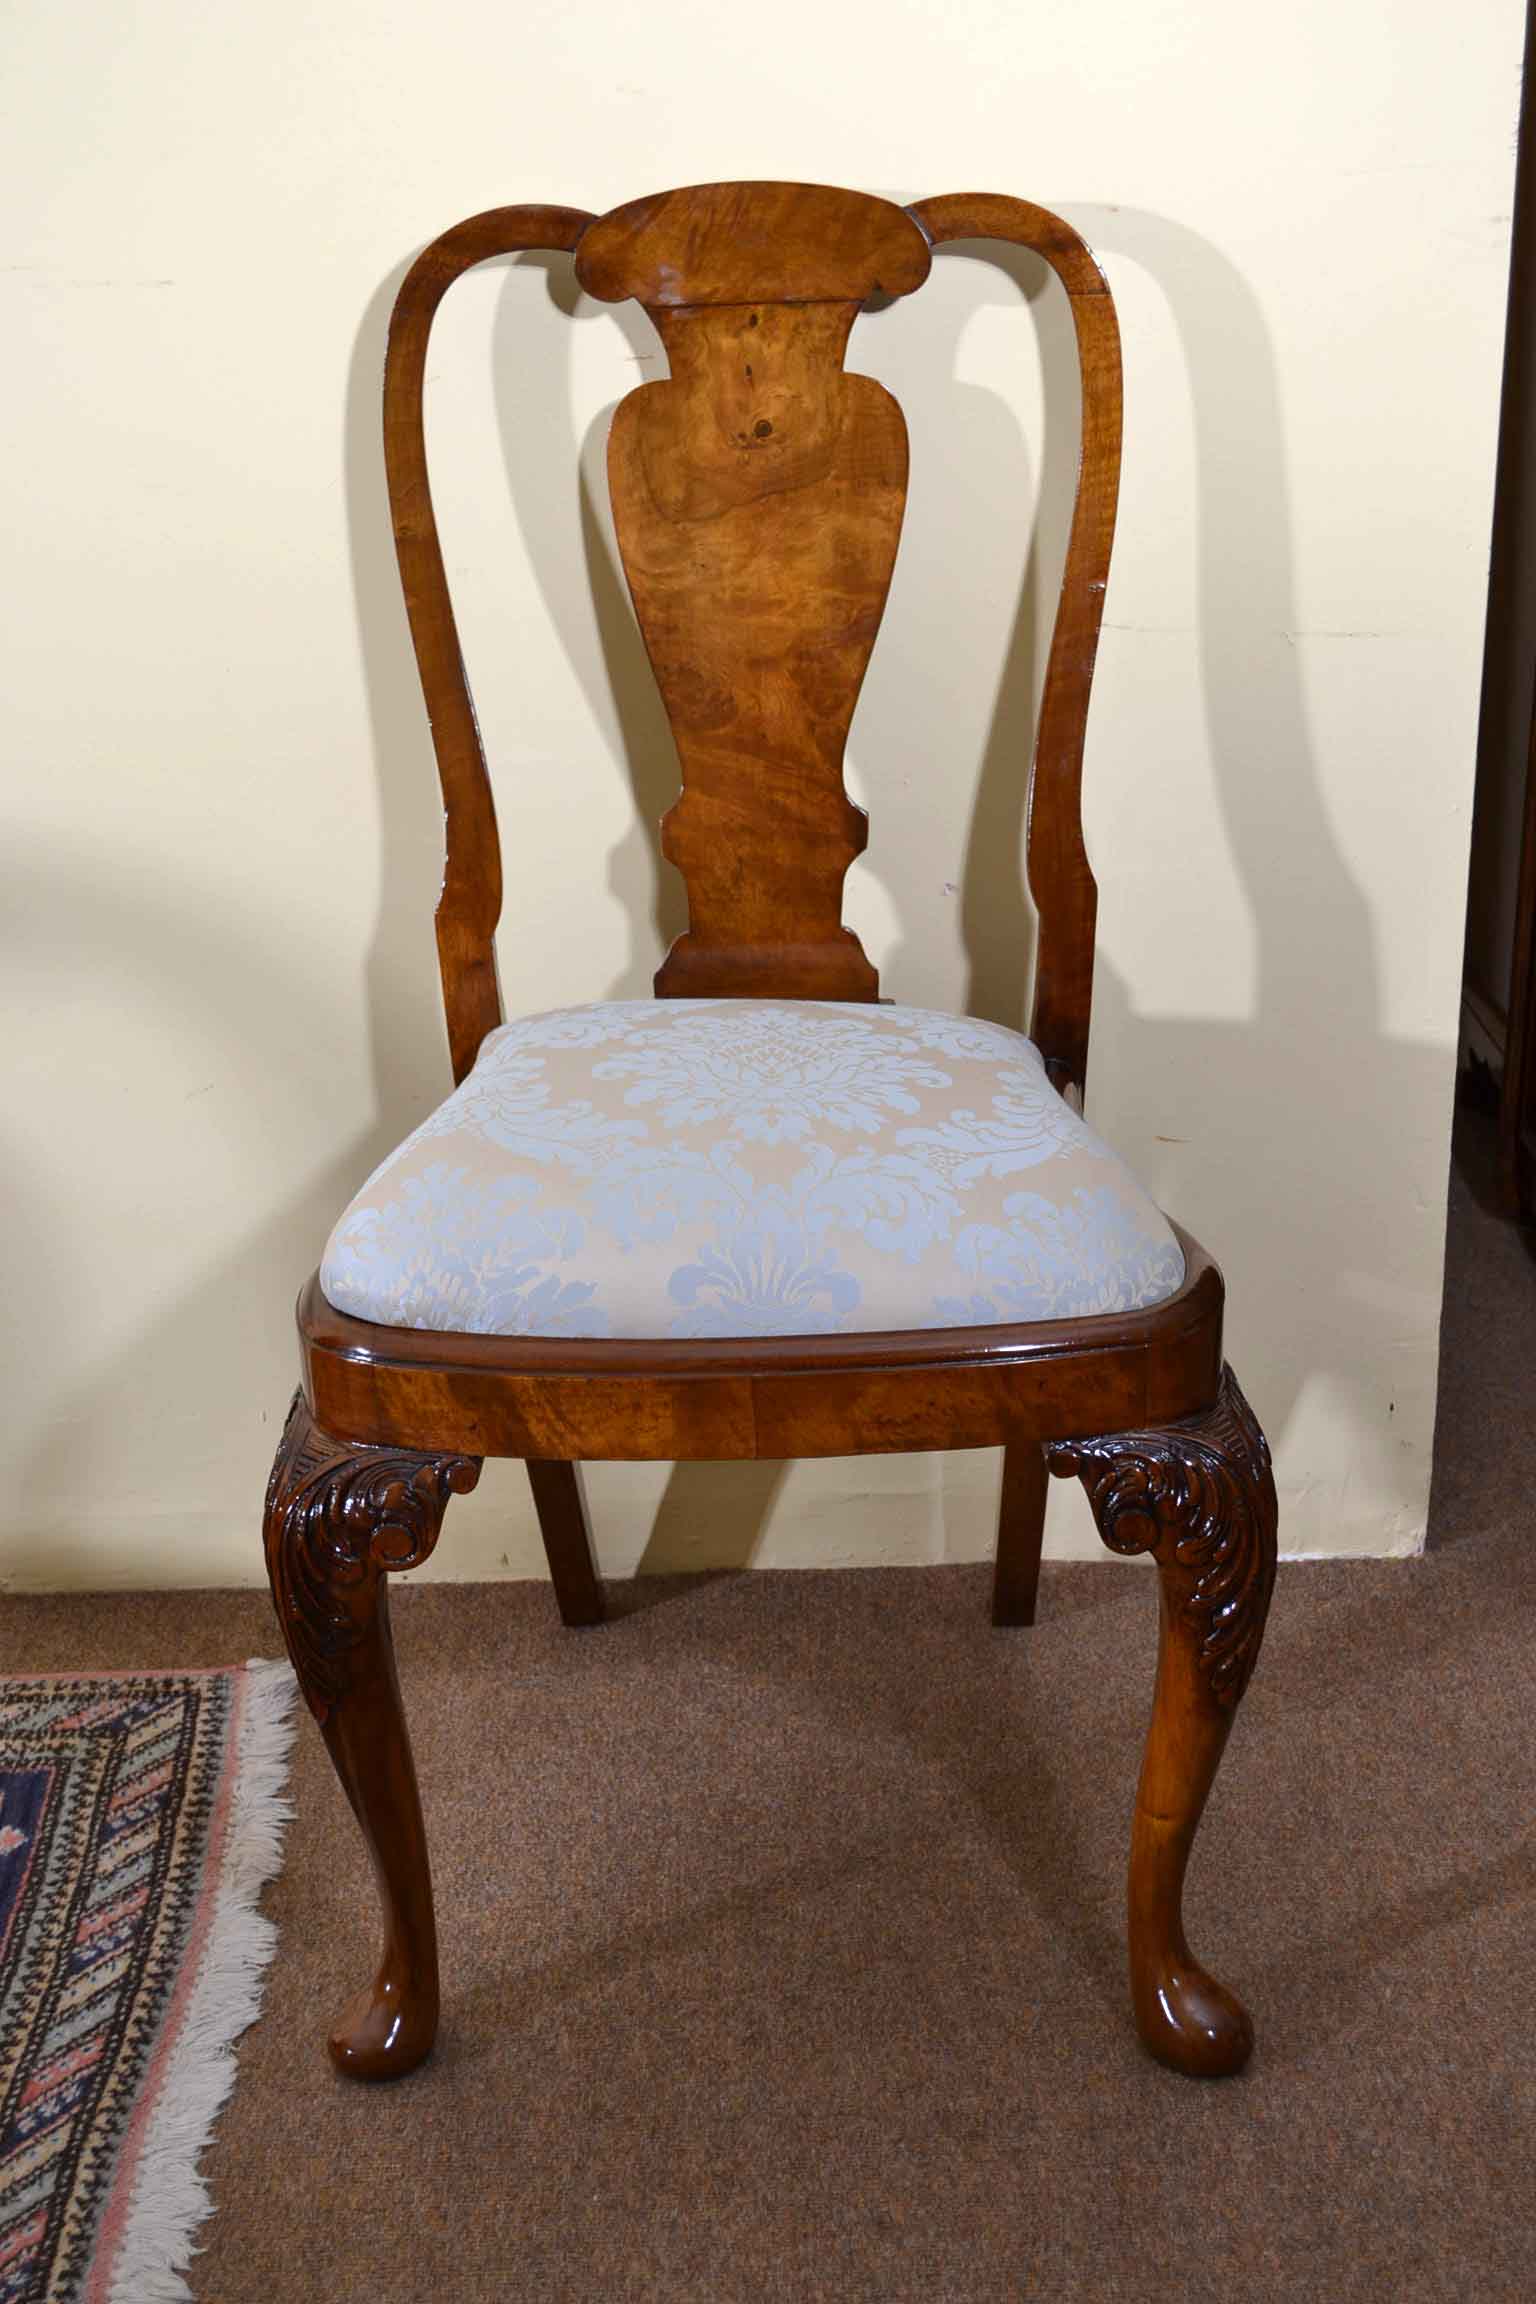 Regent Antiques - Dining tables and chairs - Table and chair sets